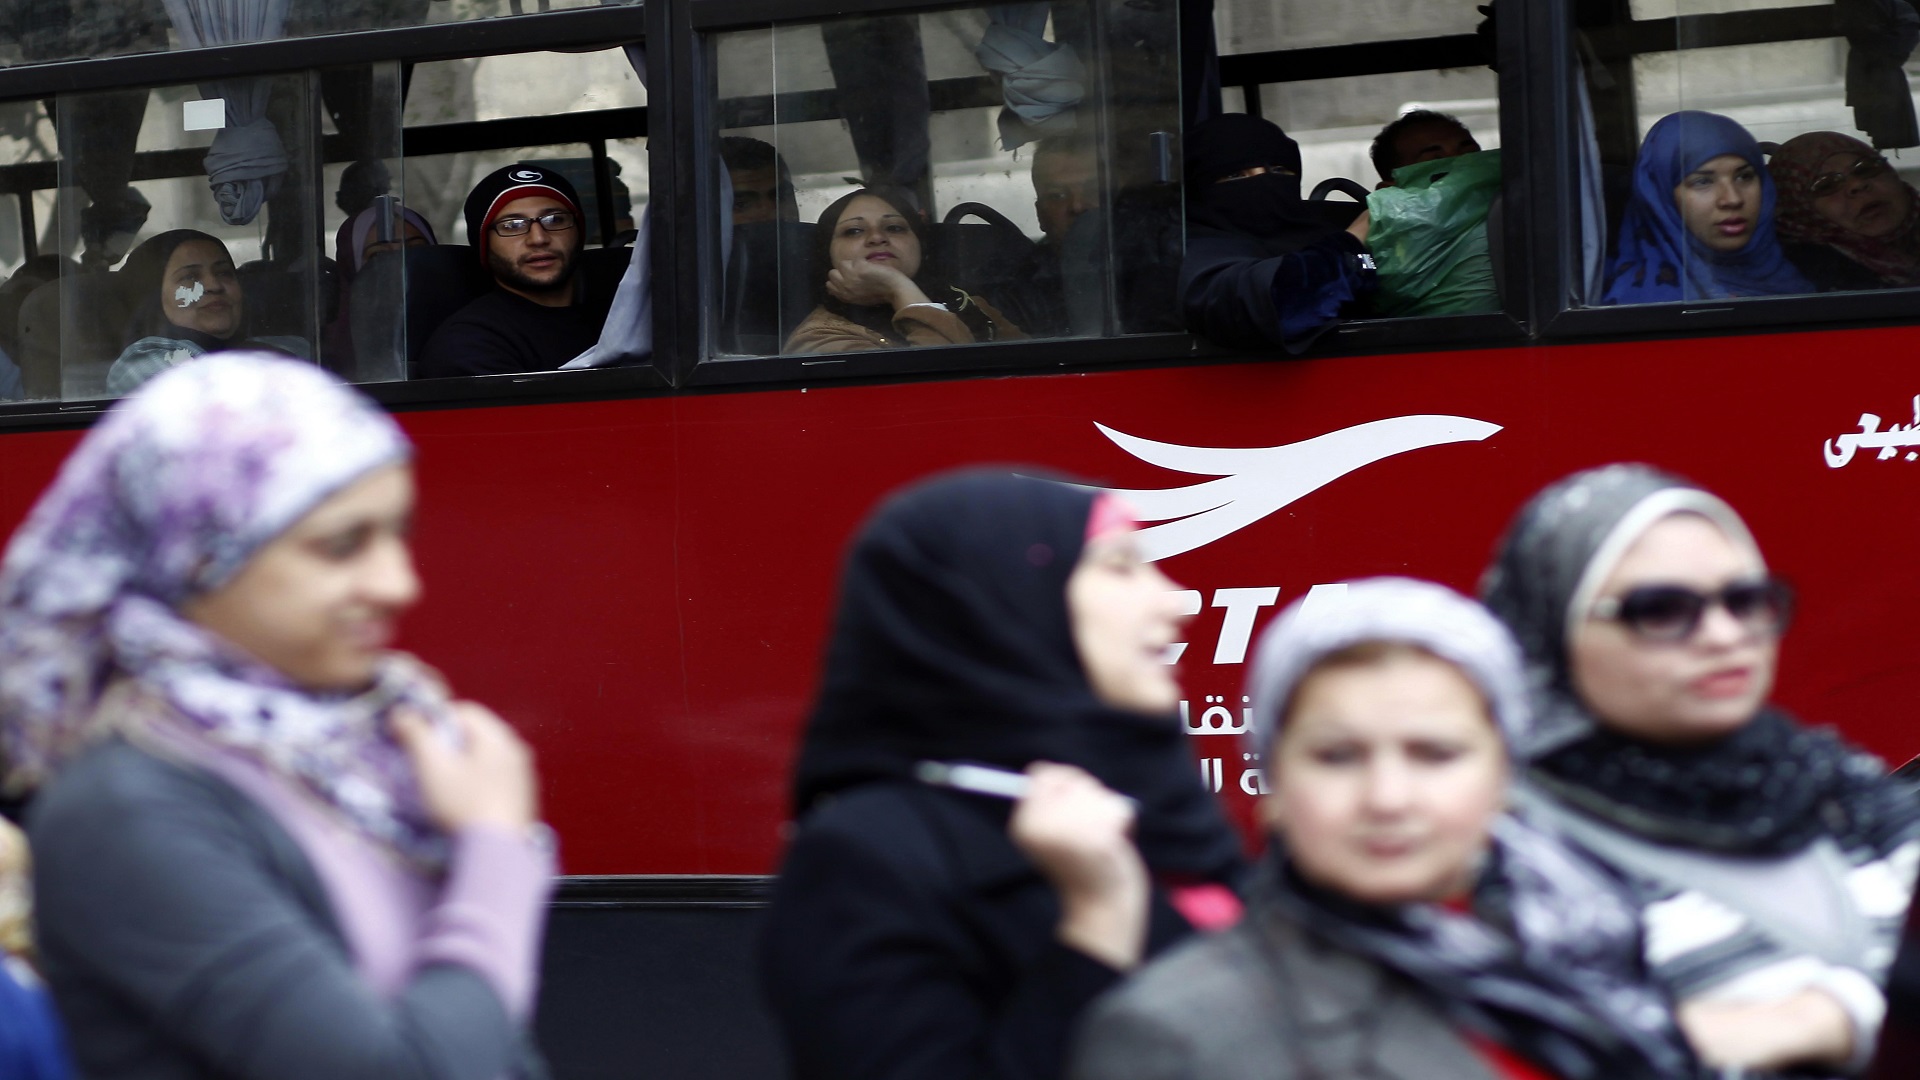 Egyptians ride in a bus past a polling station in central Cairo on December 15, 2012. (MAHMUD KHALED/AFP/Getty Images)